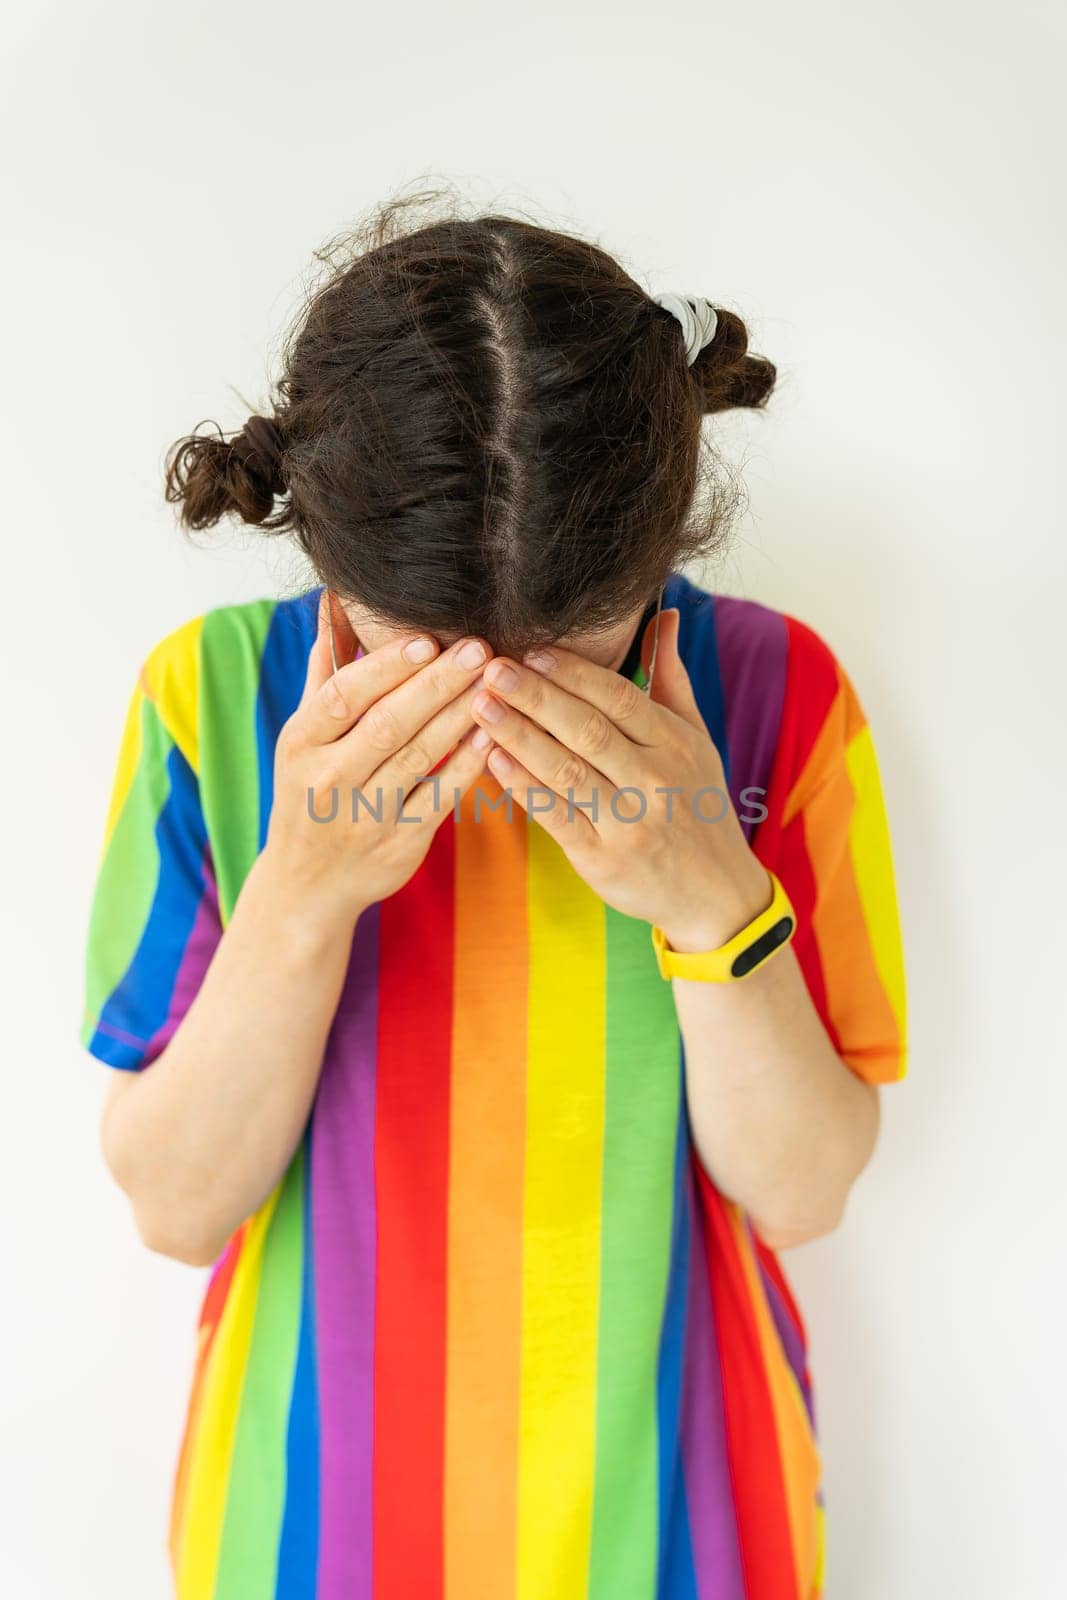 This is a portrait of a girl dressed in a shirt with a rainbow covering their face with her hands. The background is white. The mood of the image is sad or upset. by sfinks